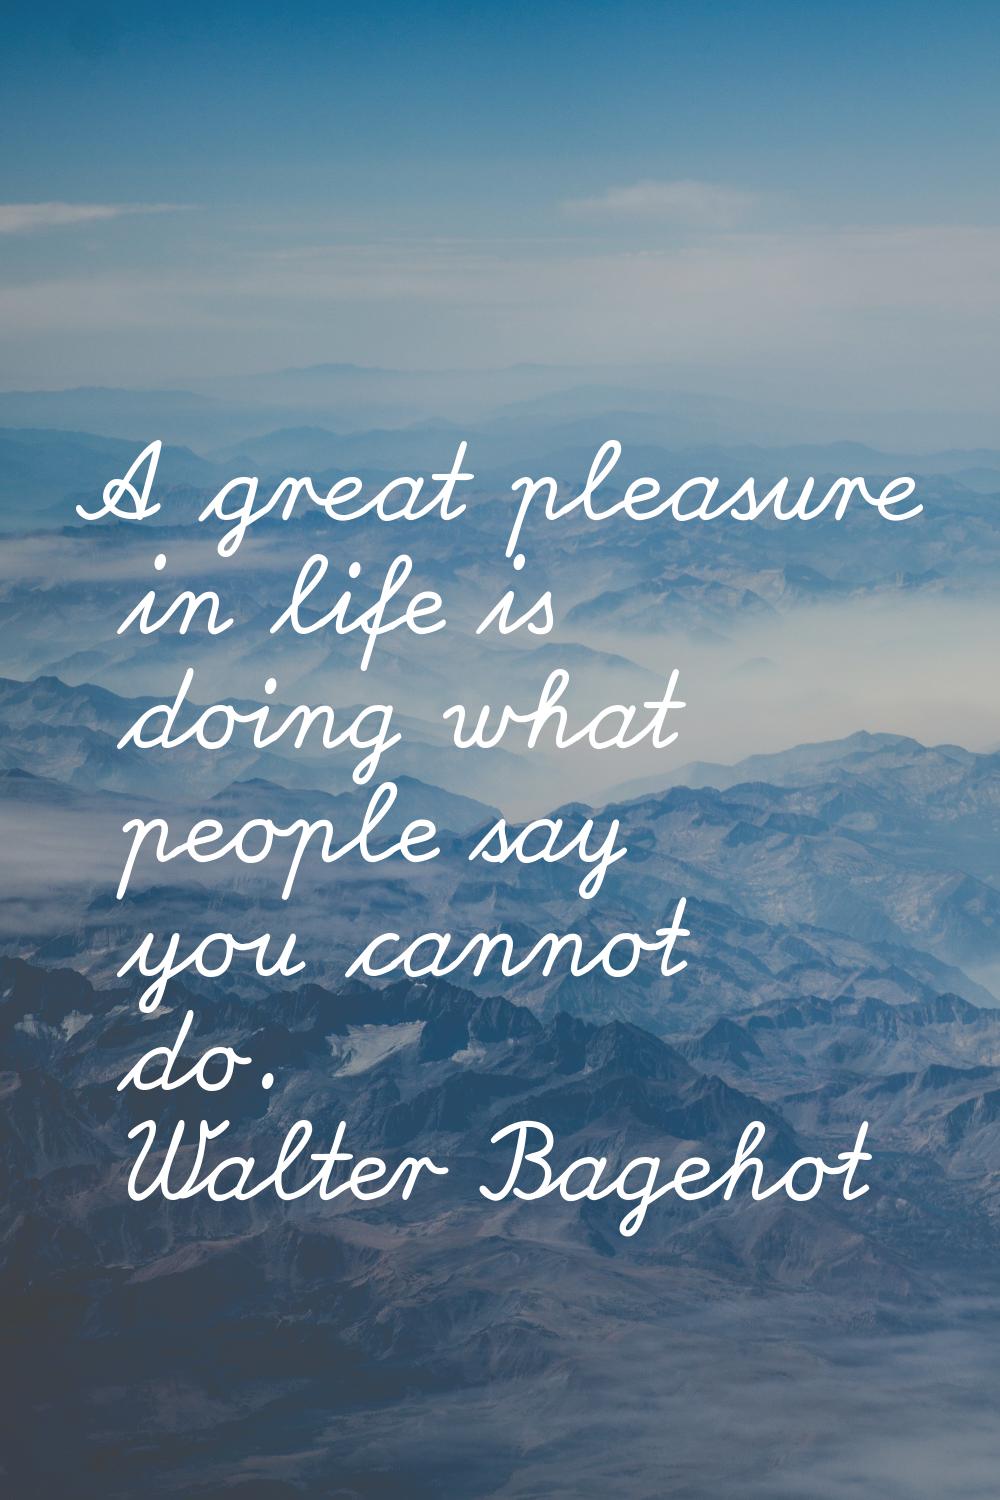 A great pleasure in life is doing what people say you cannot do.